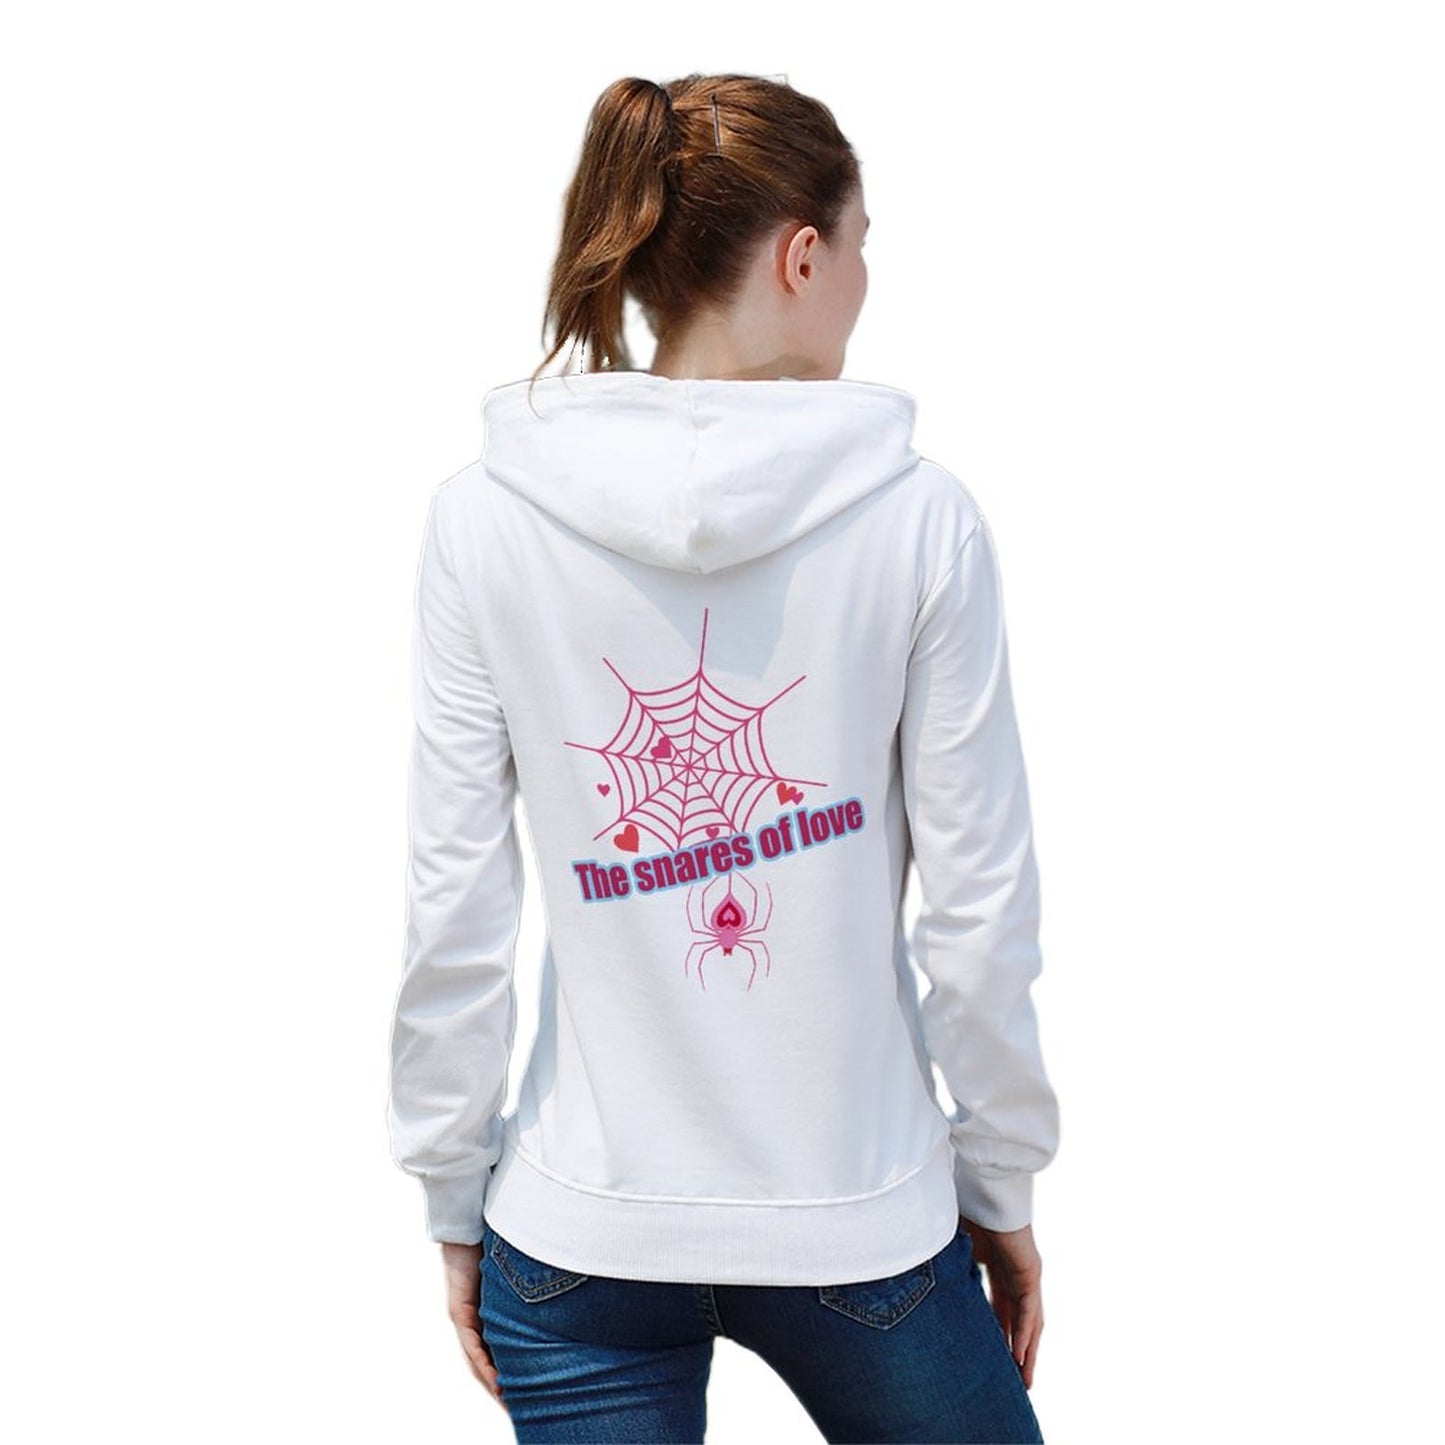 Online DIY Women's Pullover The Snares of Love Spider Pink